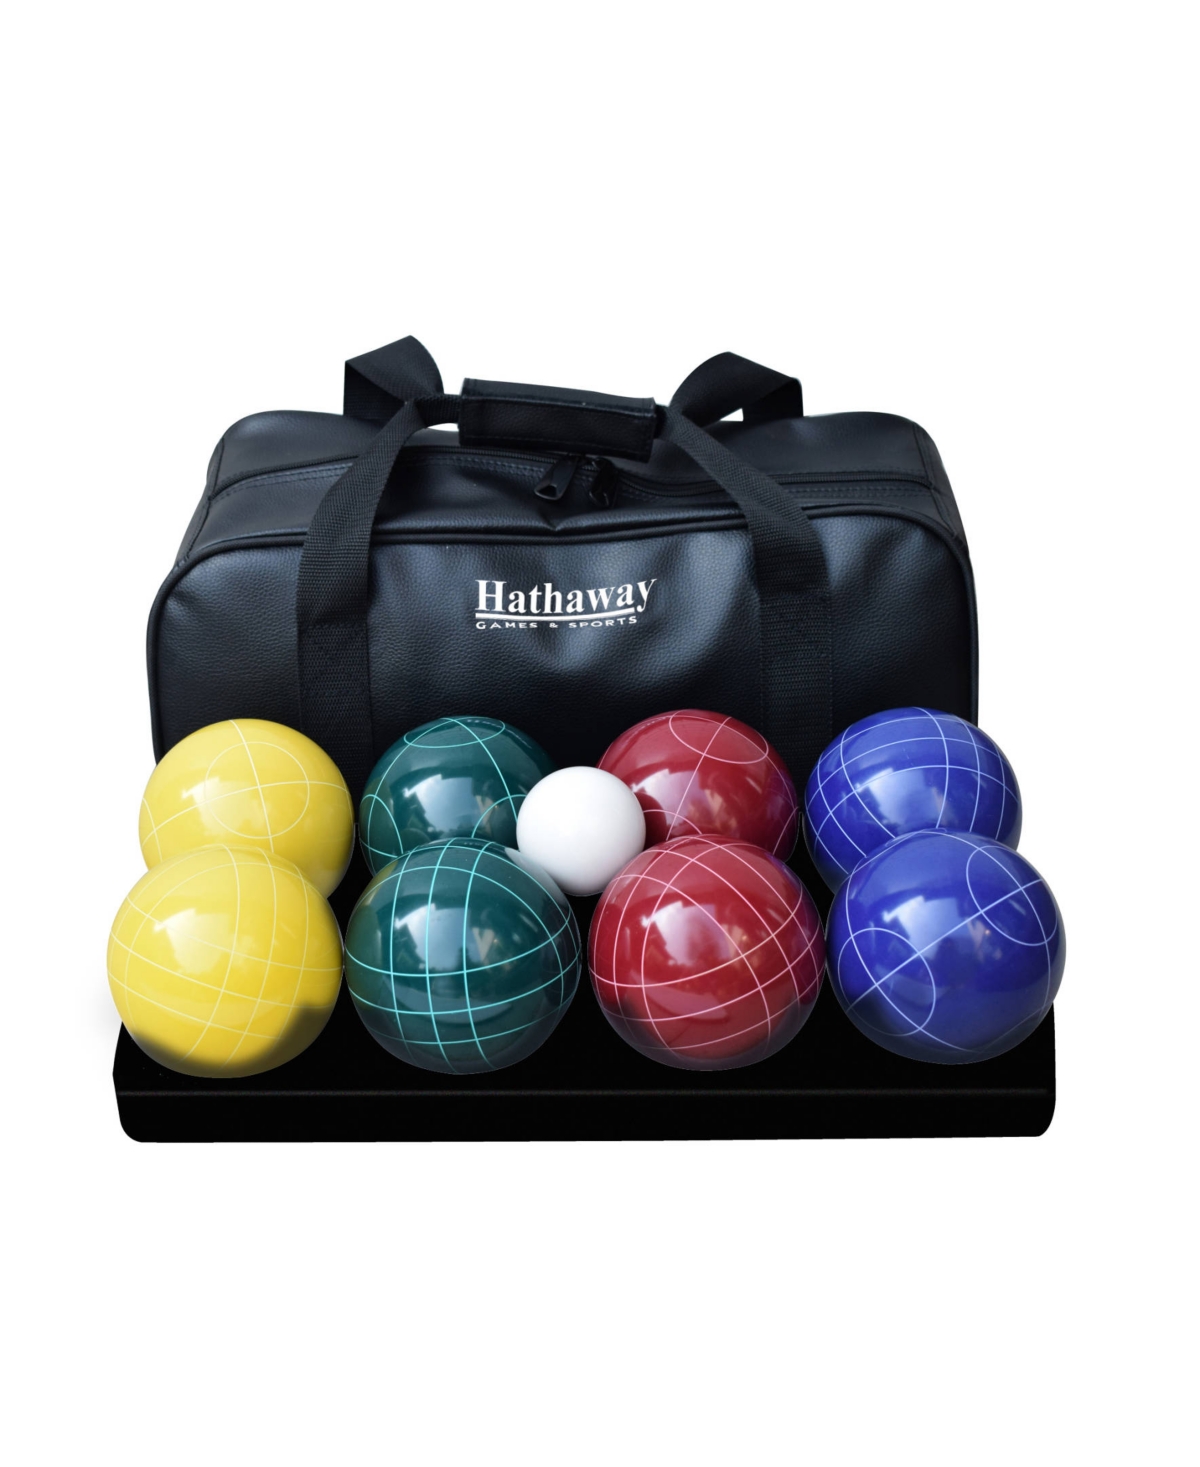 Hathaway Deluxe Bocce Ball Set In Multi